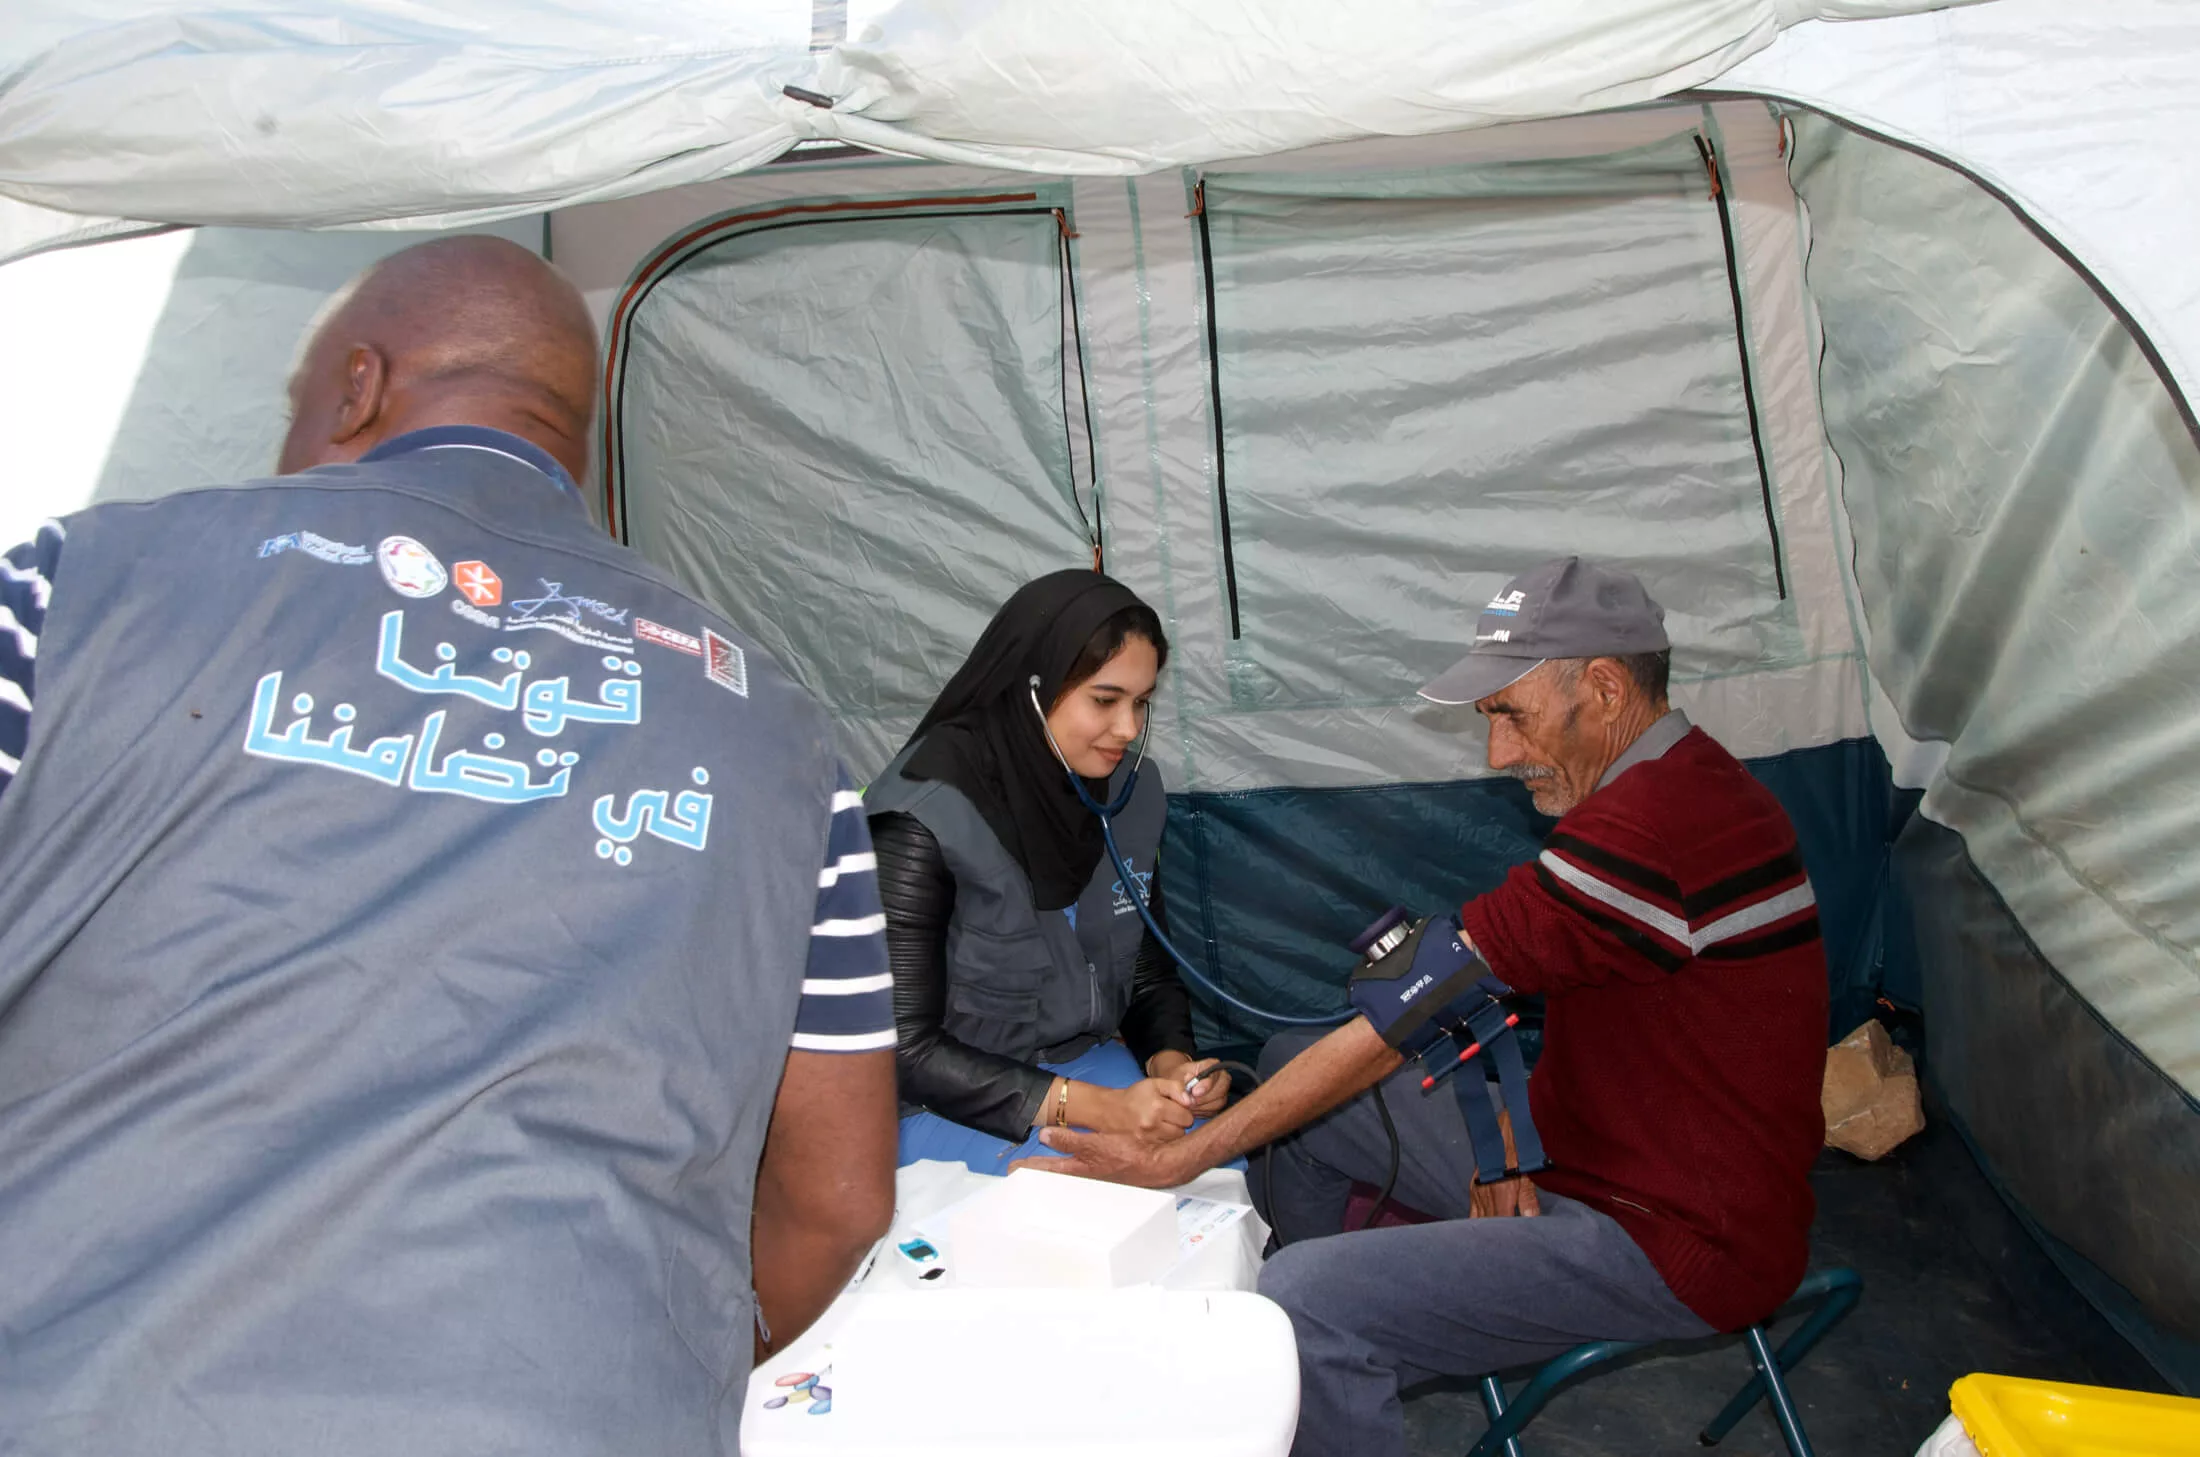 Staff members deliver vital medications and provide routine blood pressure checks on people affected by the earthquakes.